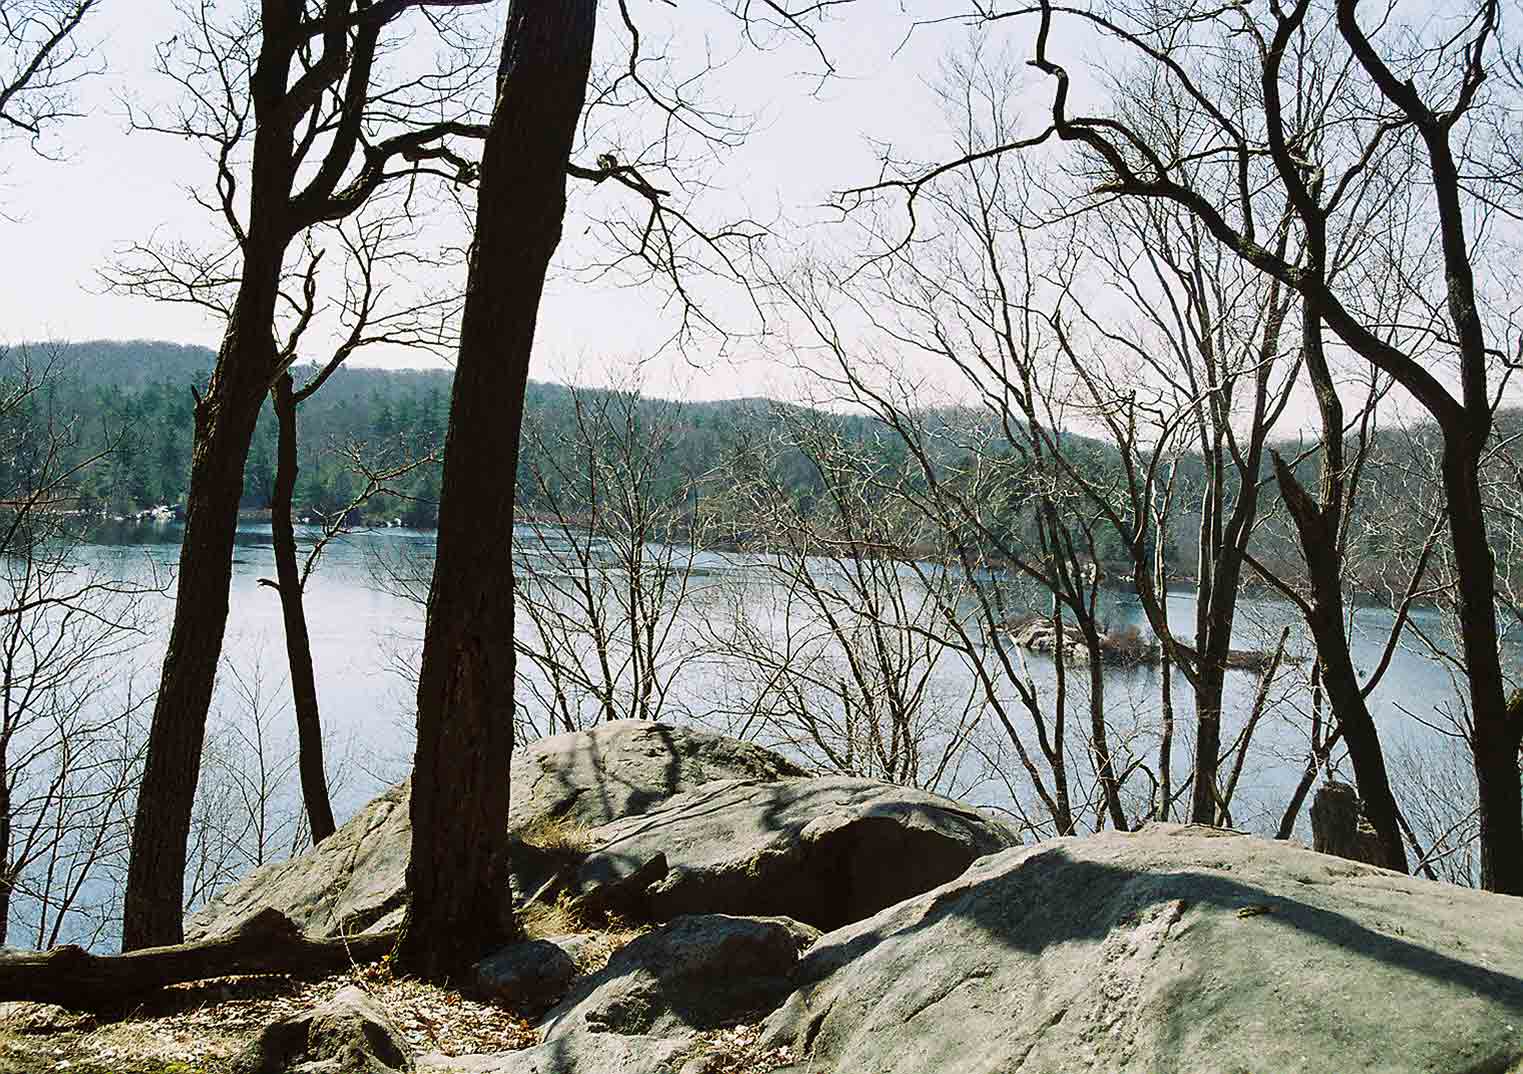 mm 3.7 - Island Pond from North Shore. Courtesy dlcul@conncoll.edu